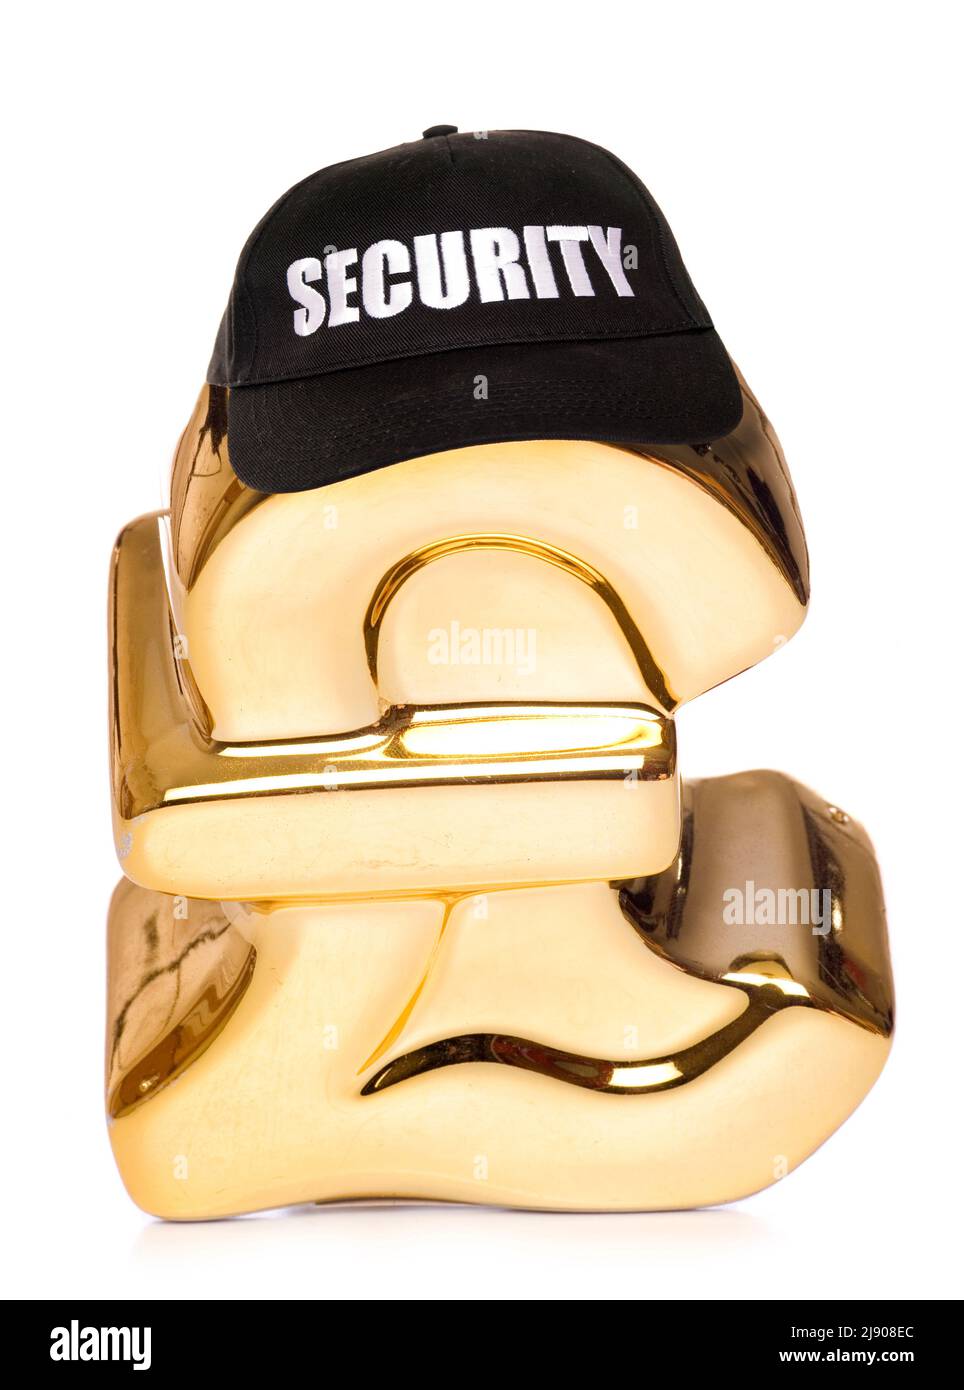 gold pound money box wearing a security hat isolated on a white background Stock Photo